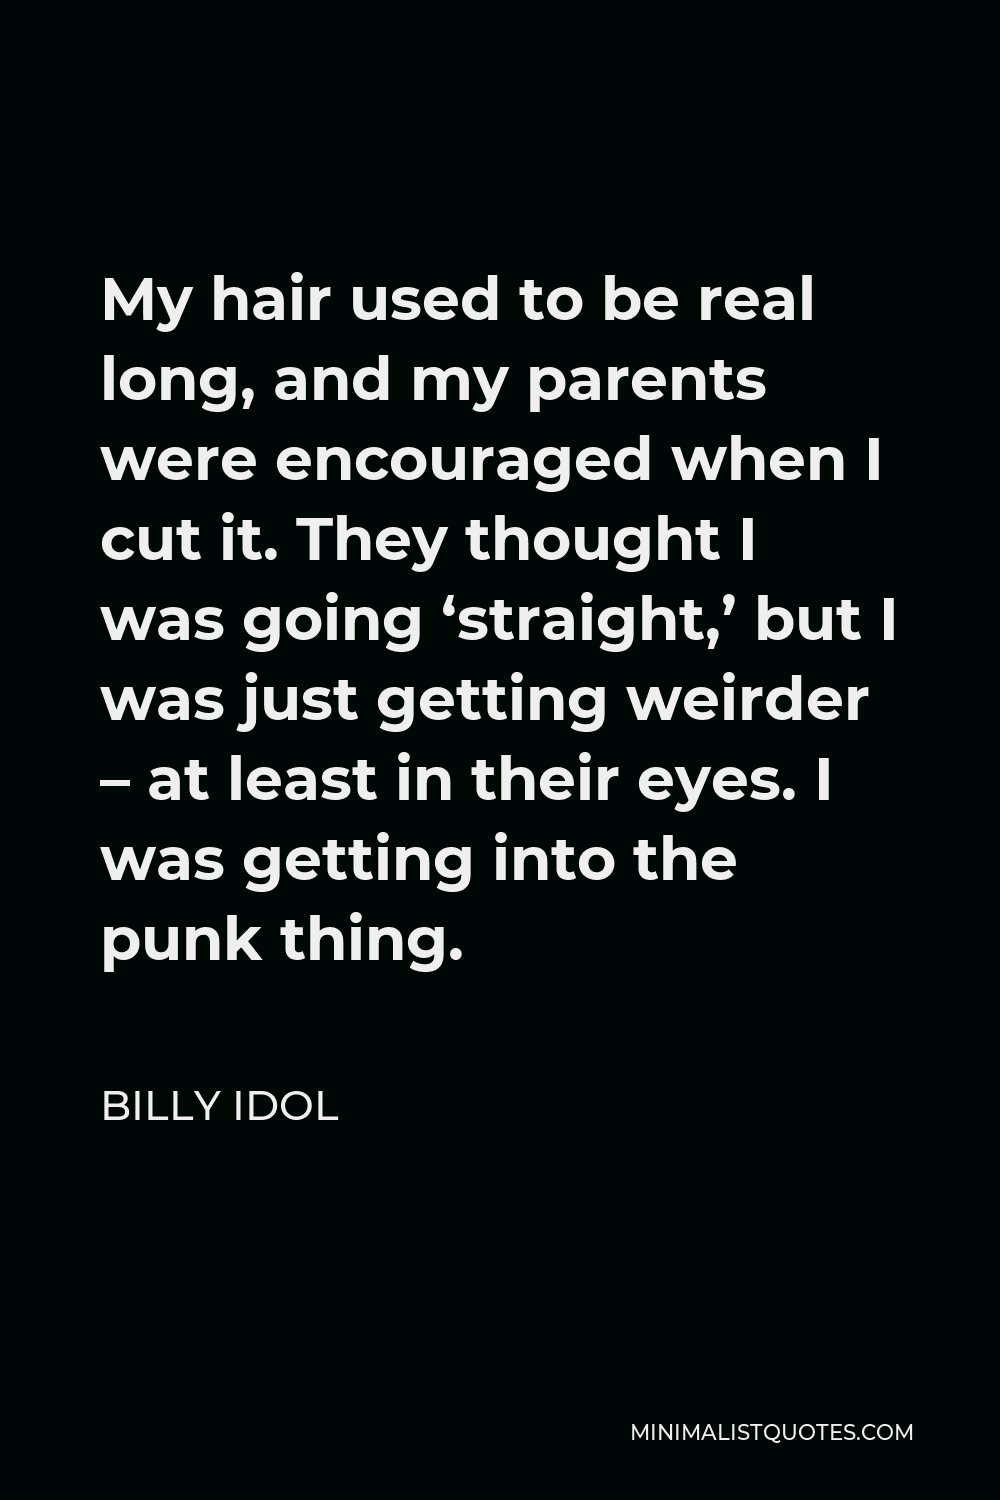 Billy Idol Quote - My hair used to be real long, and my parents were encouraged when I cut it. They thought I was going ‘straight,’ but I was just getting weirder – at least in their eyes. I was getting into the punk thing.